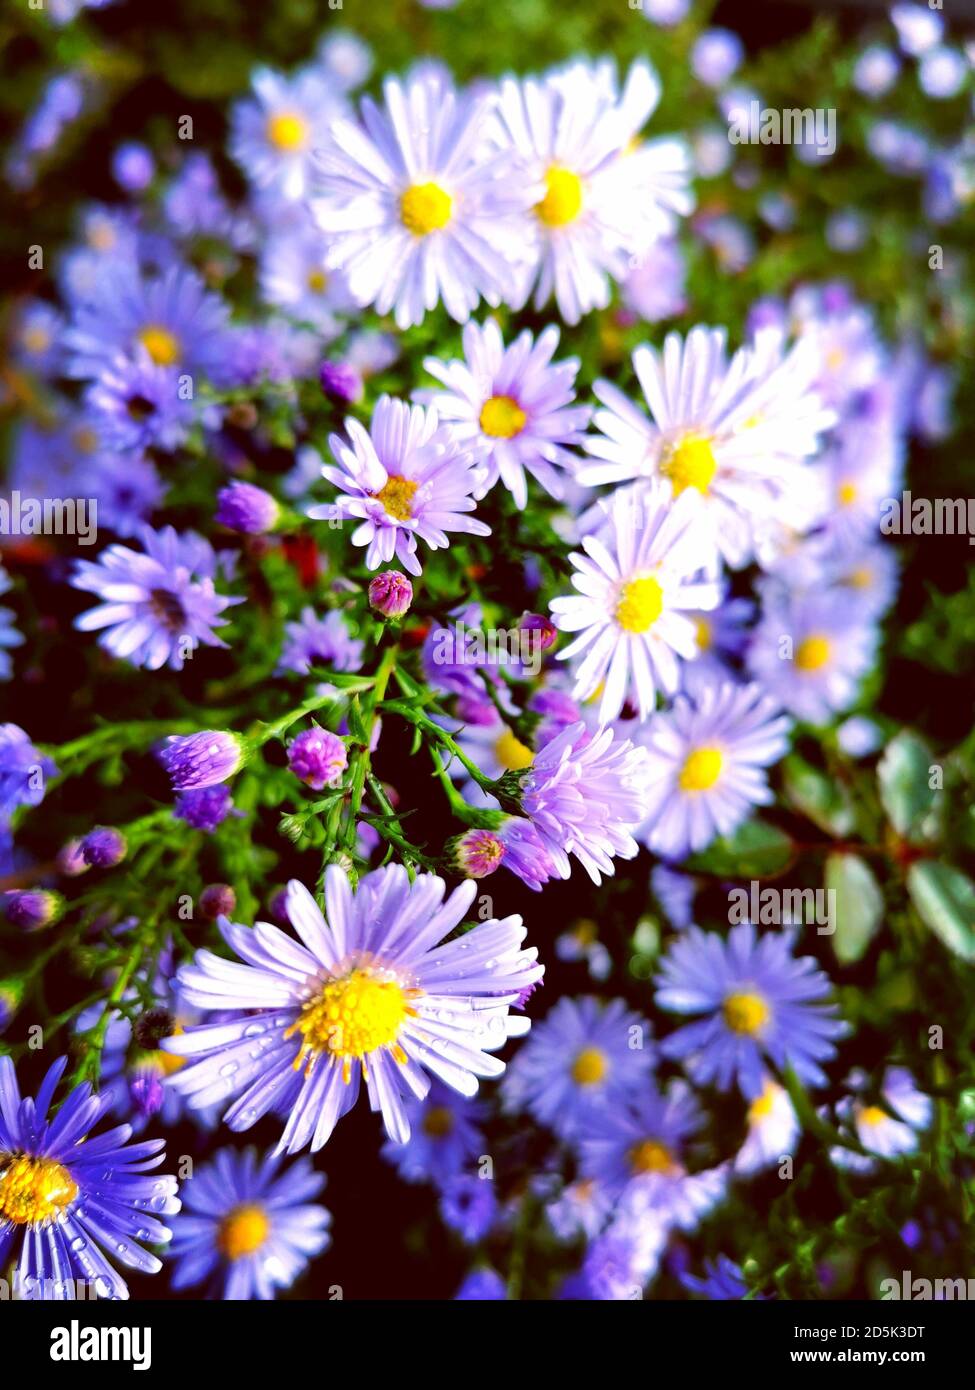 floral background with blue michaelmas daisies, blossoms covered with raindrops Stock Photo